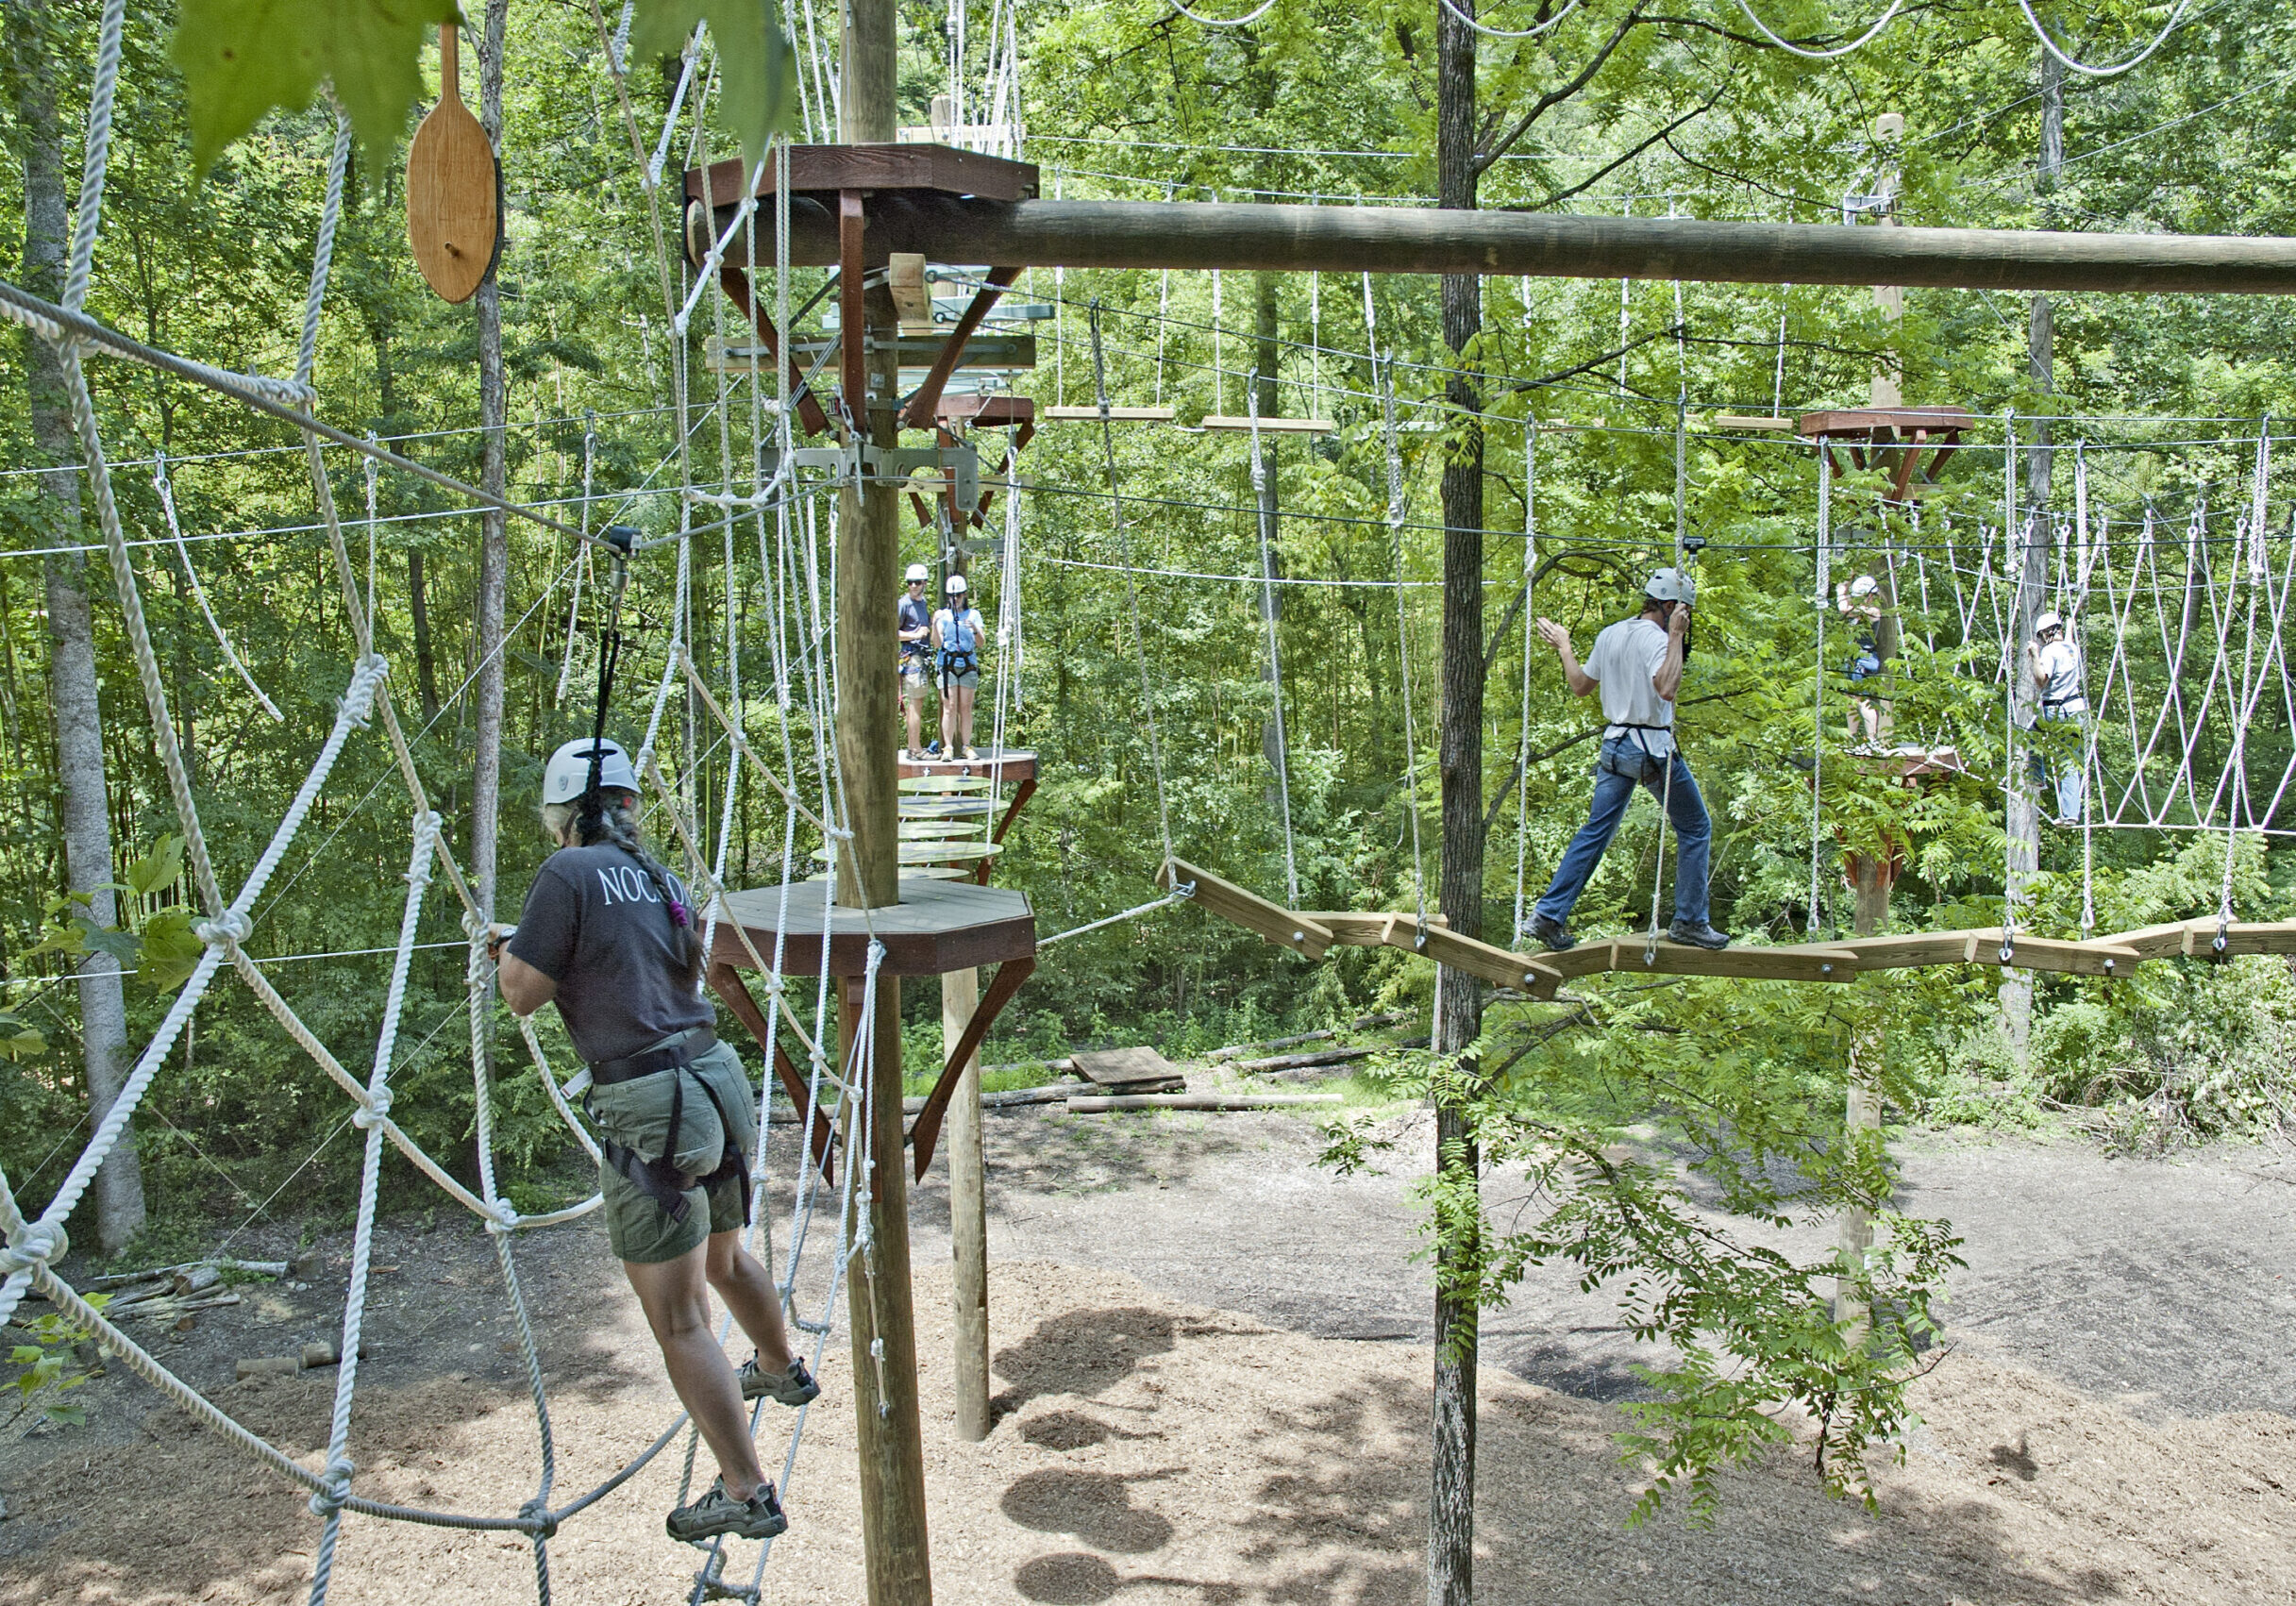 Spiders Web feature at NOA adventure course